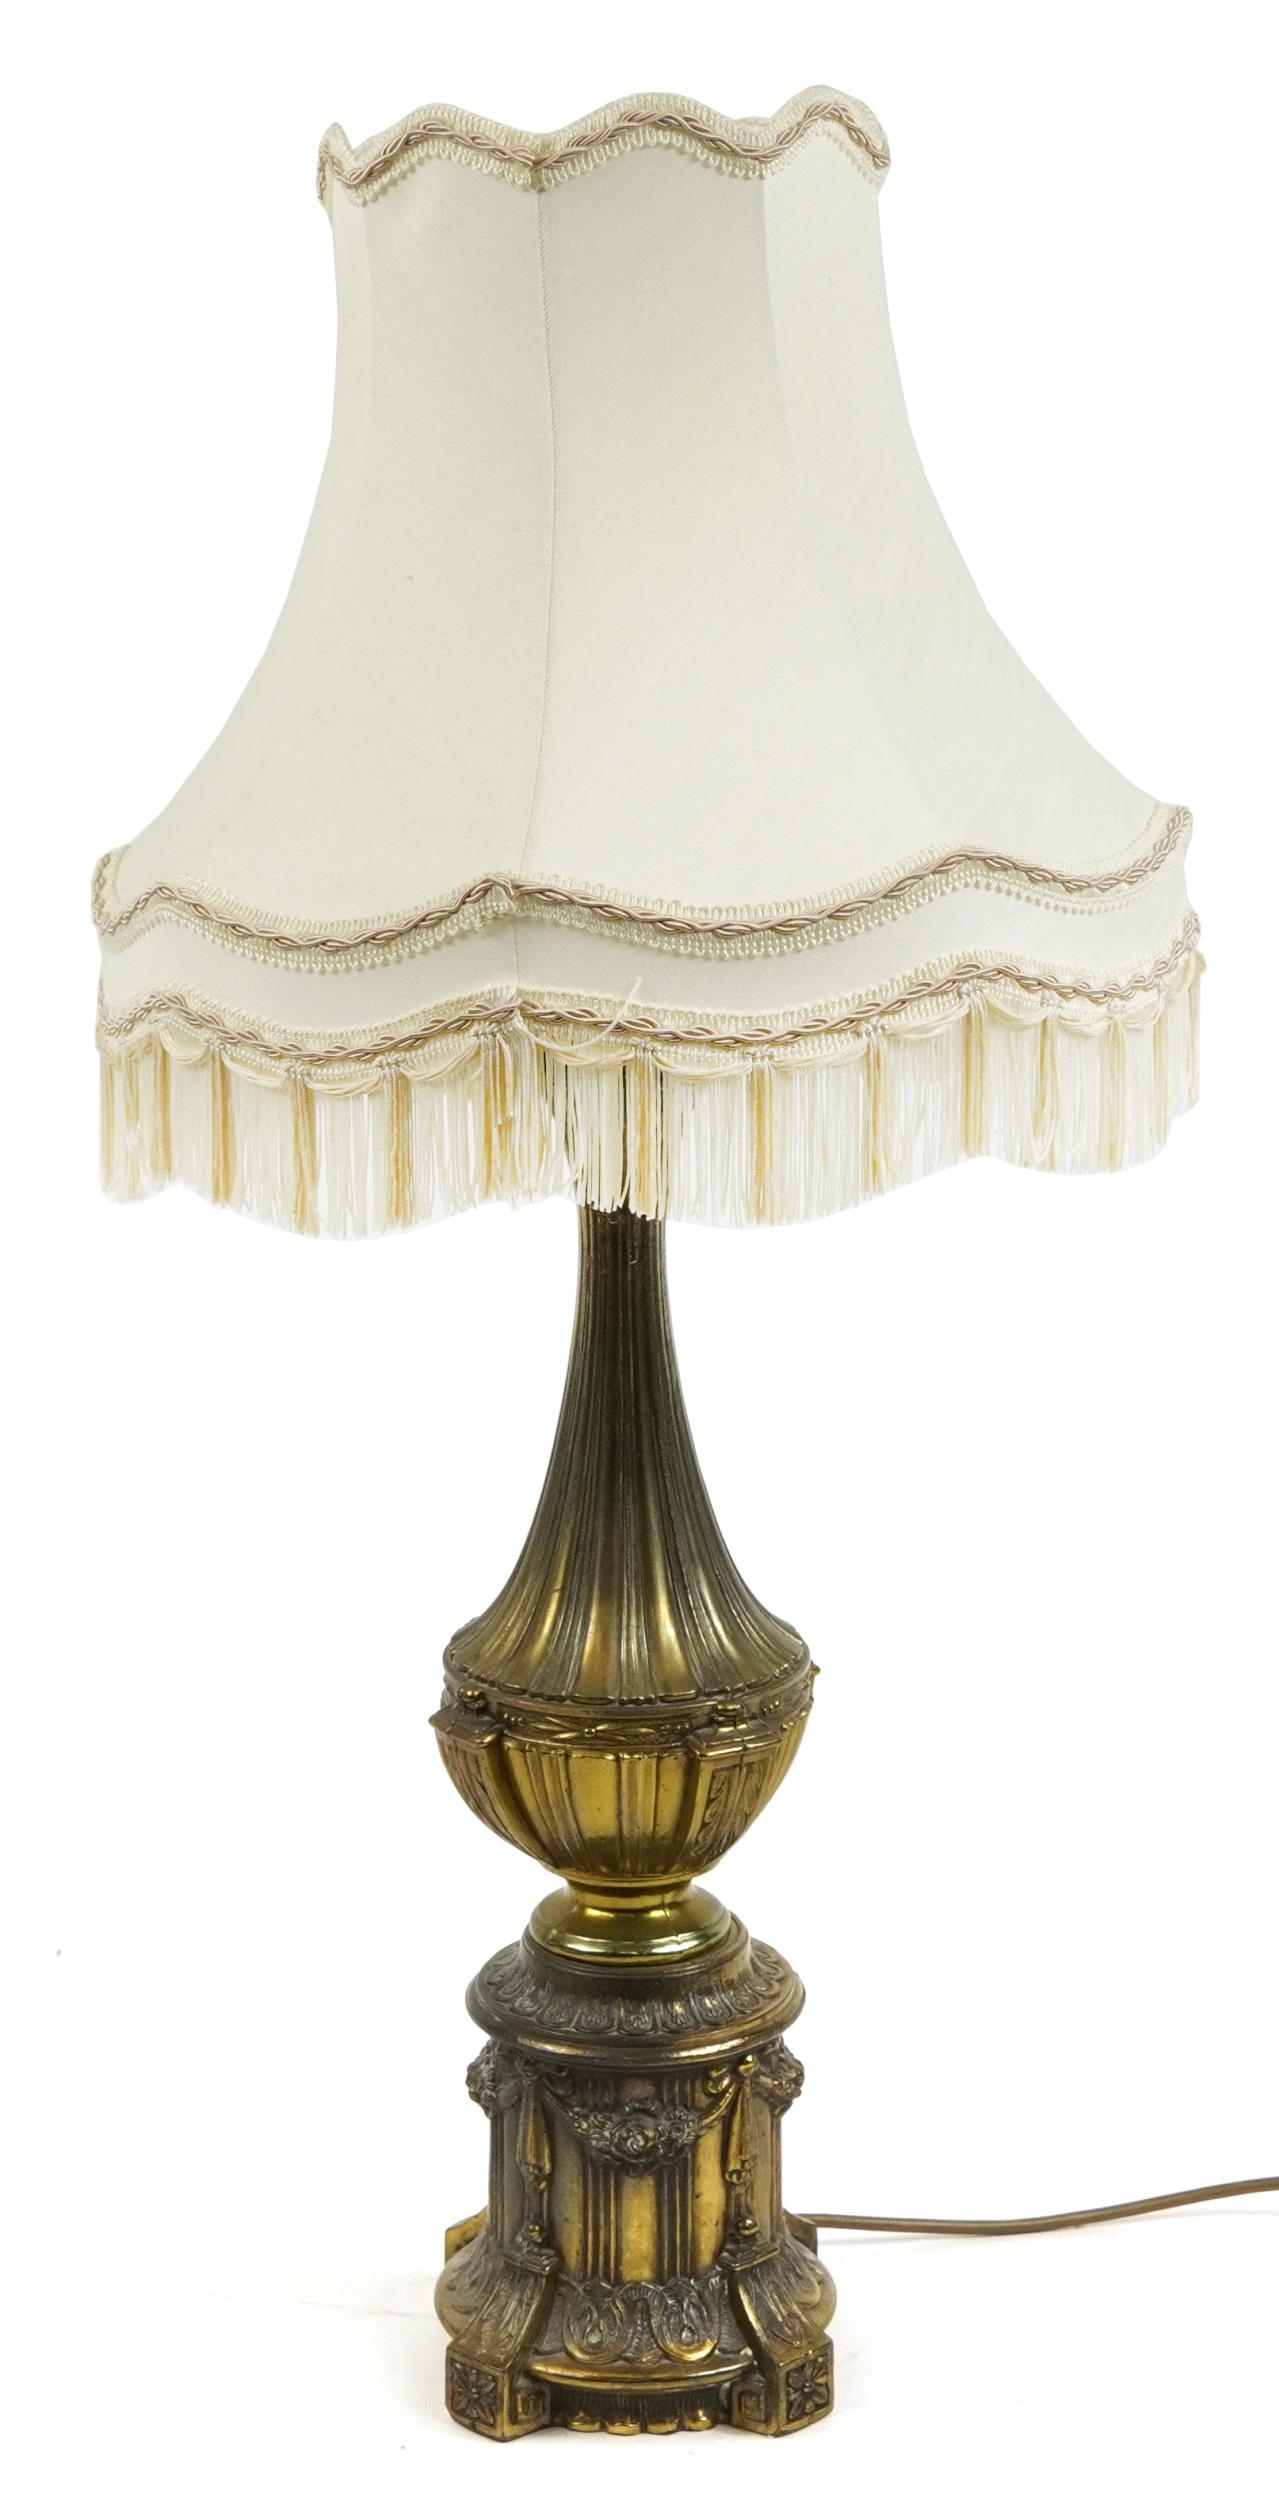 Ornate gilt brass table lamp with shade, 77cm high